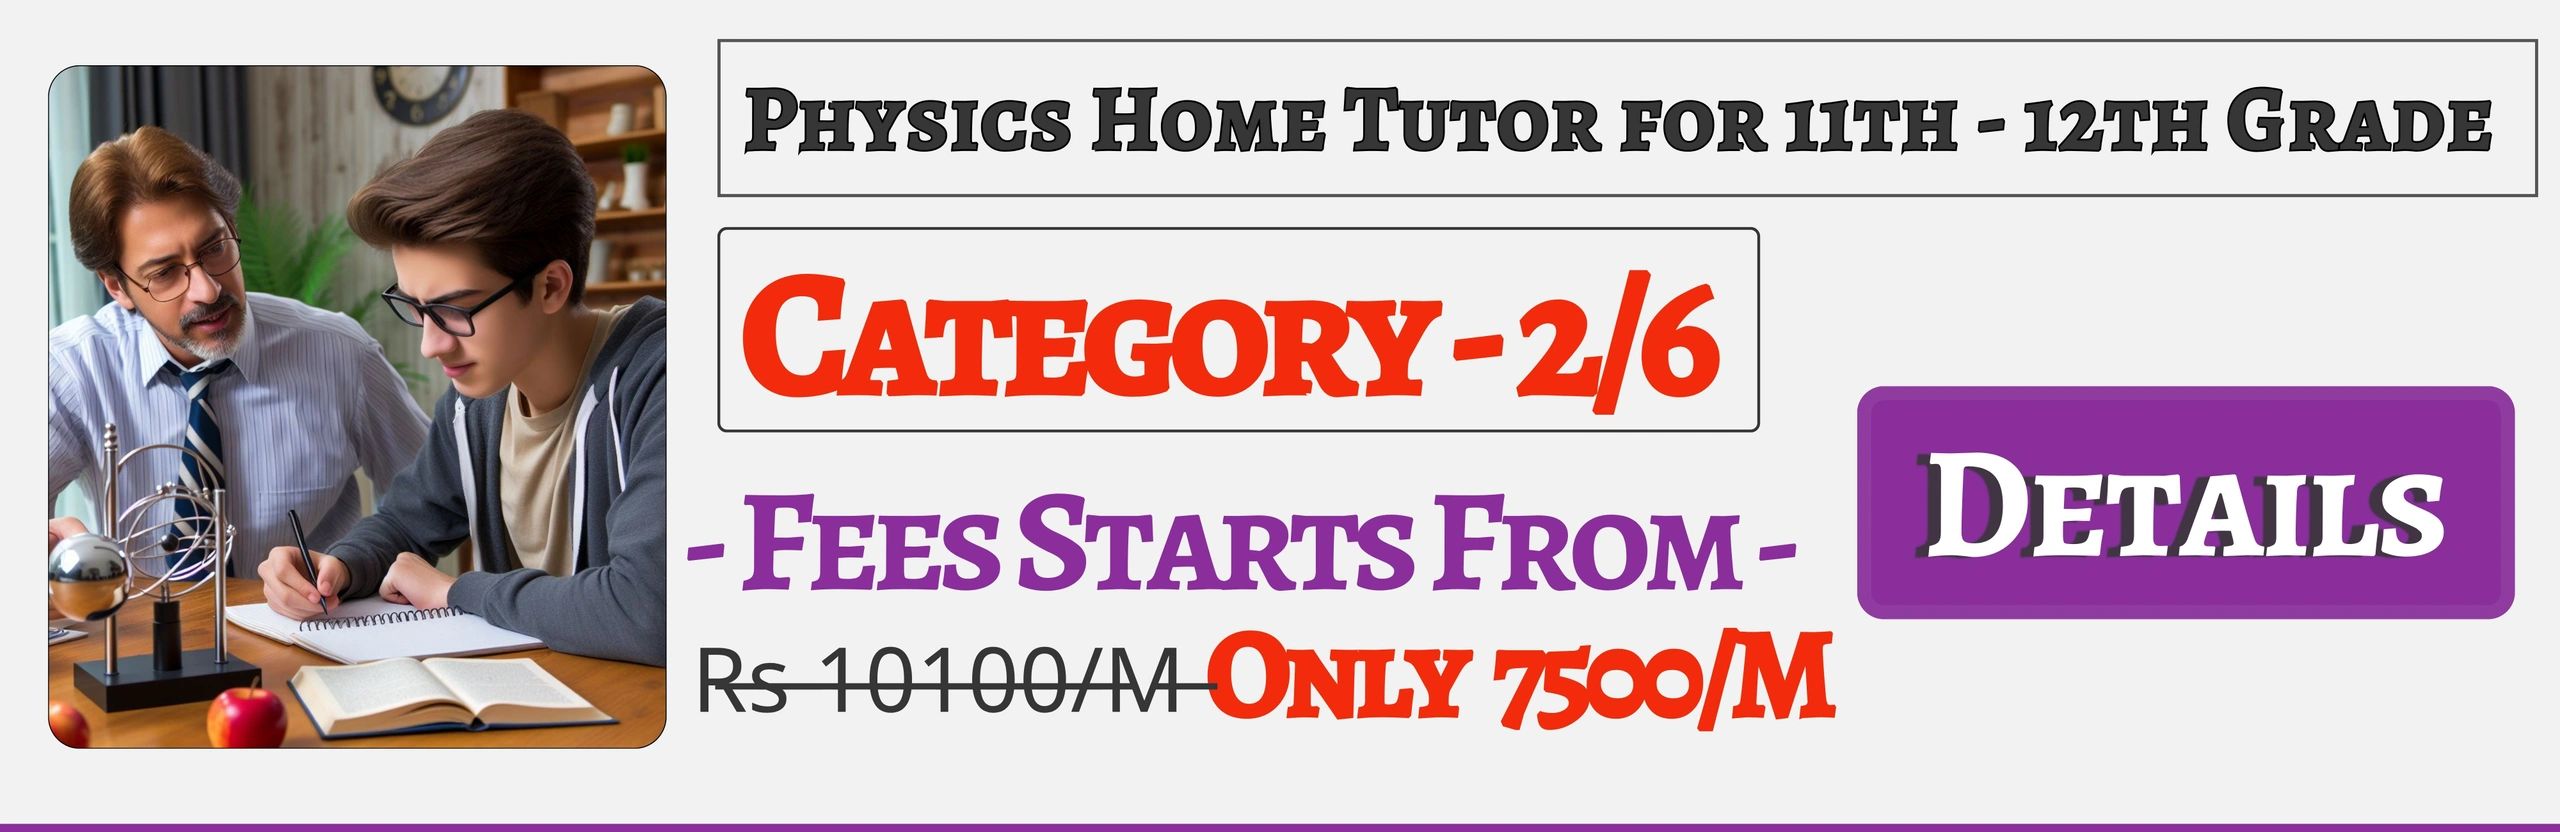 Book Best Nearby Physics Home Tuition Tutors For 11th & 12th In Jaipur , Fees Only 7500/M